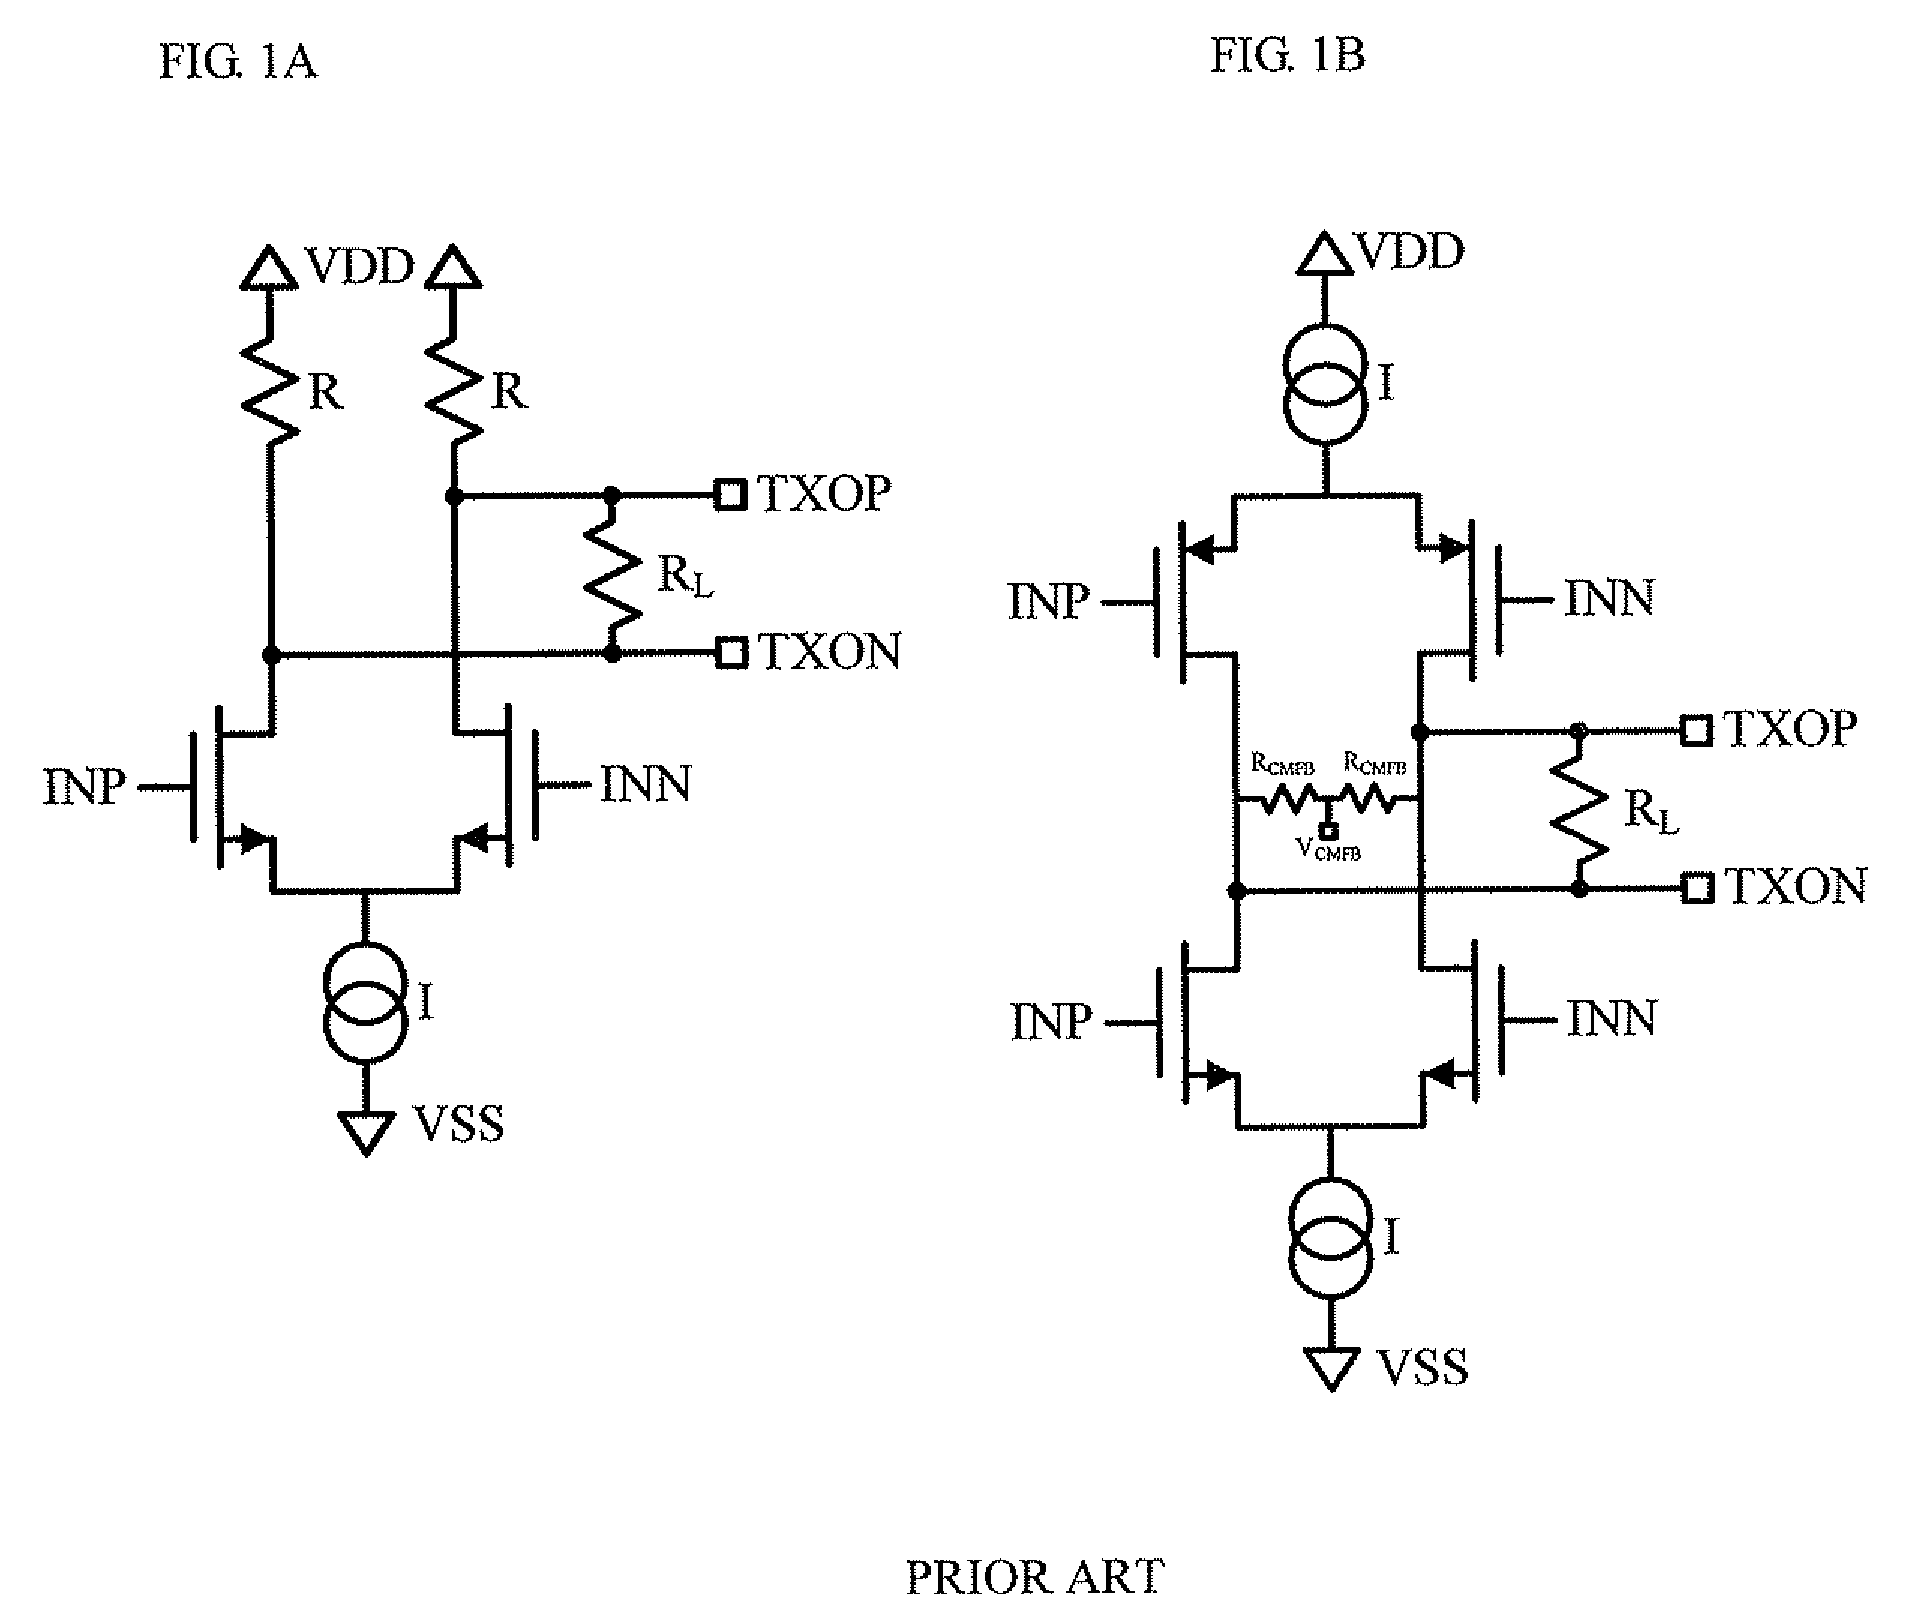 Configurable voltage mode transmitted architecture with common-mode adjustment and novel pre-emphasis